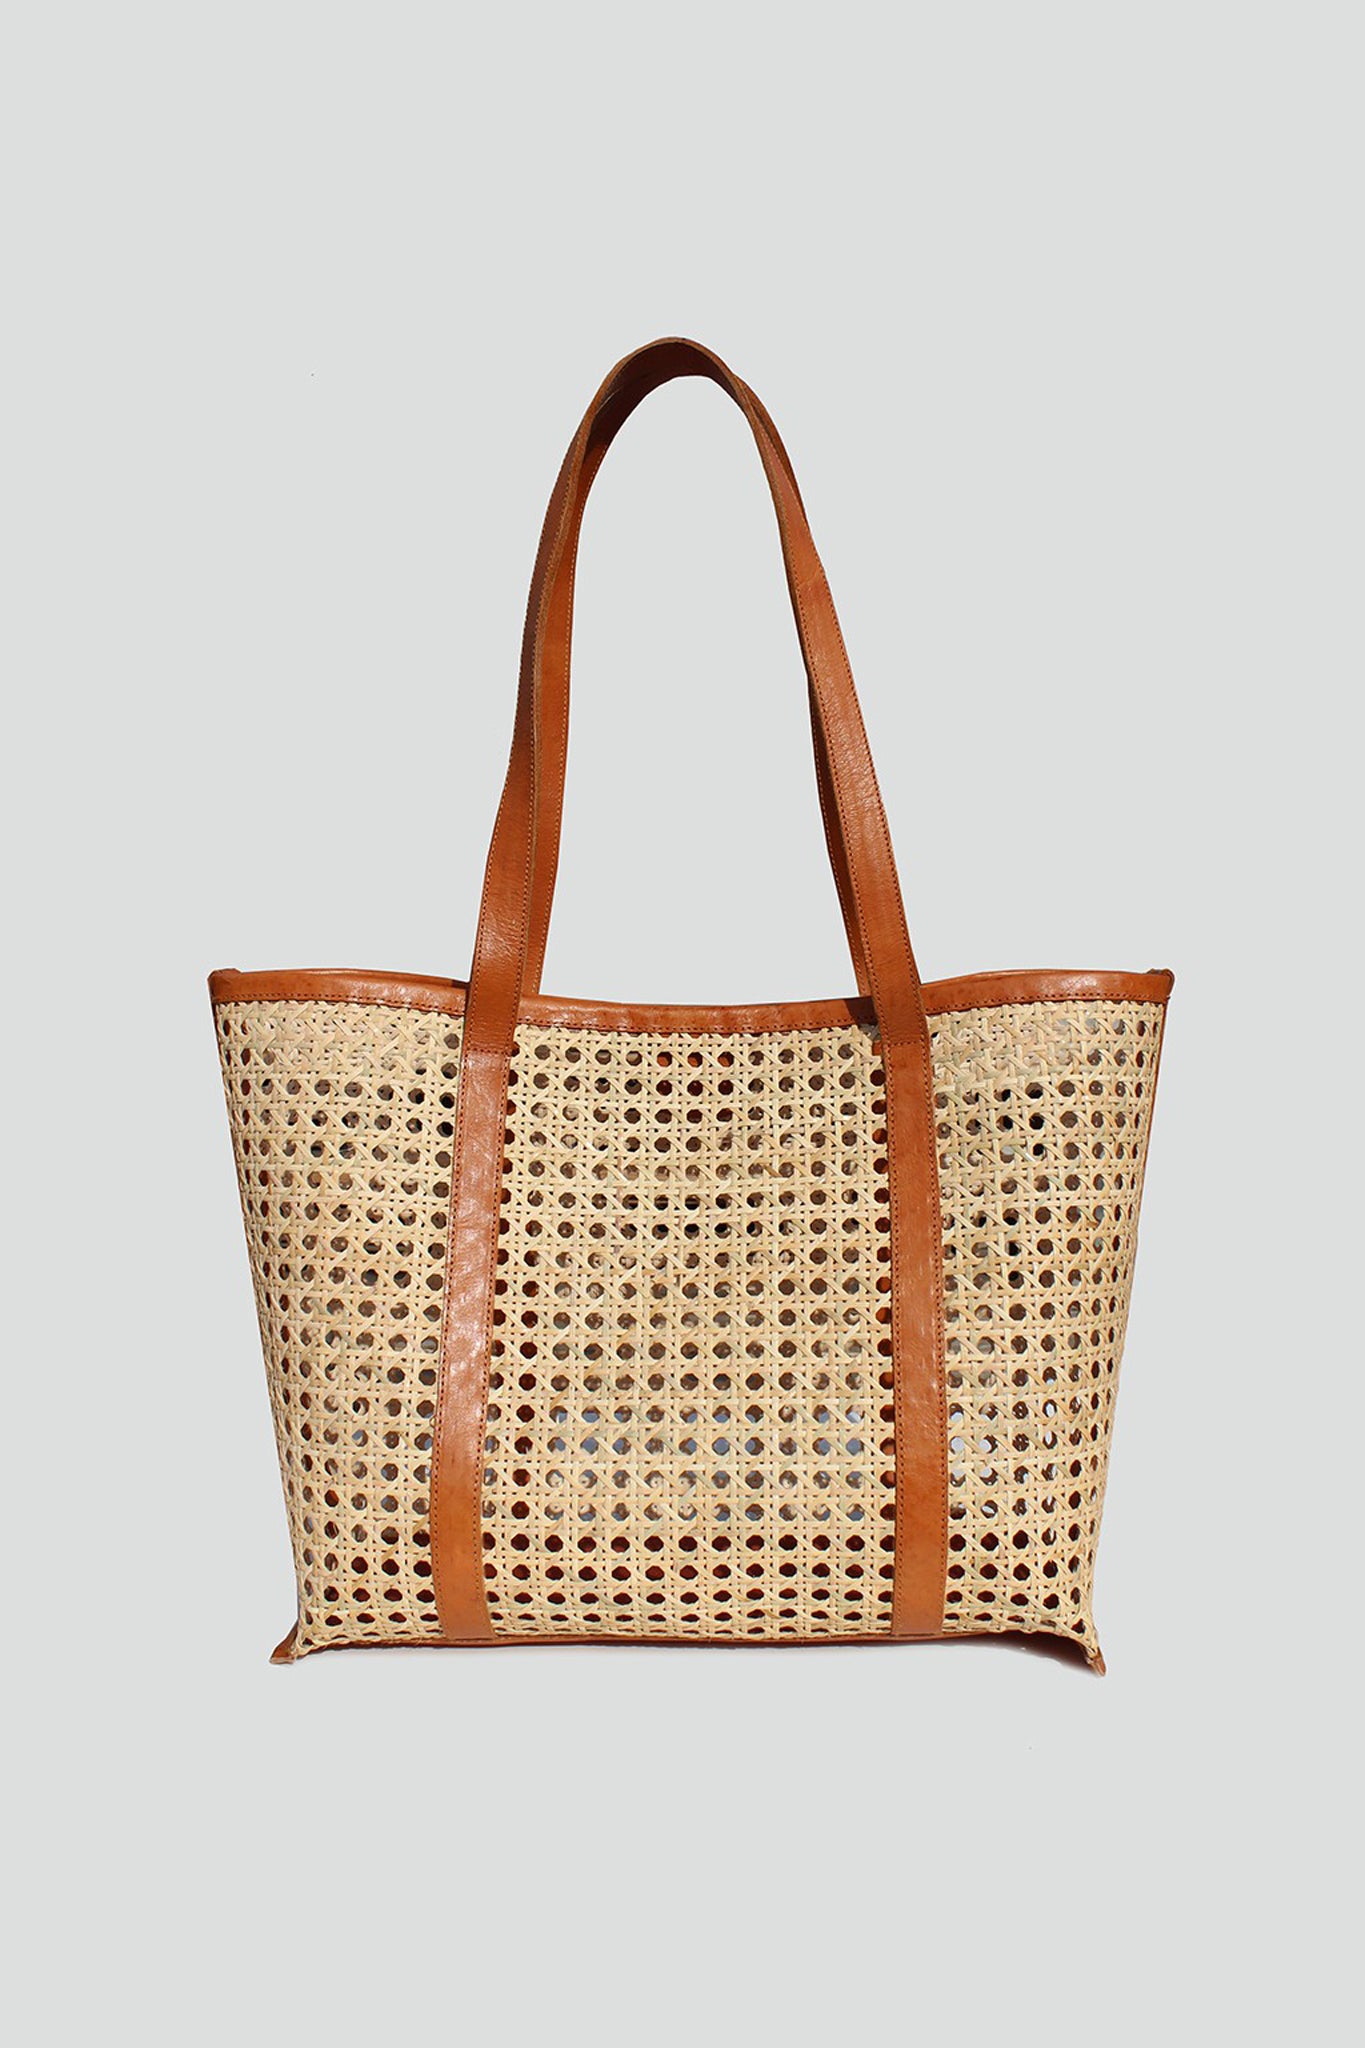 View 1 of Nusa Tote in Tan, a Bags from Larrea Cove. Detail: Take your beach vibes to the next level with the Nusa Tote in Tan.